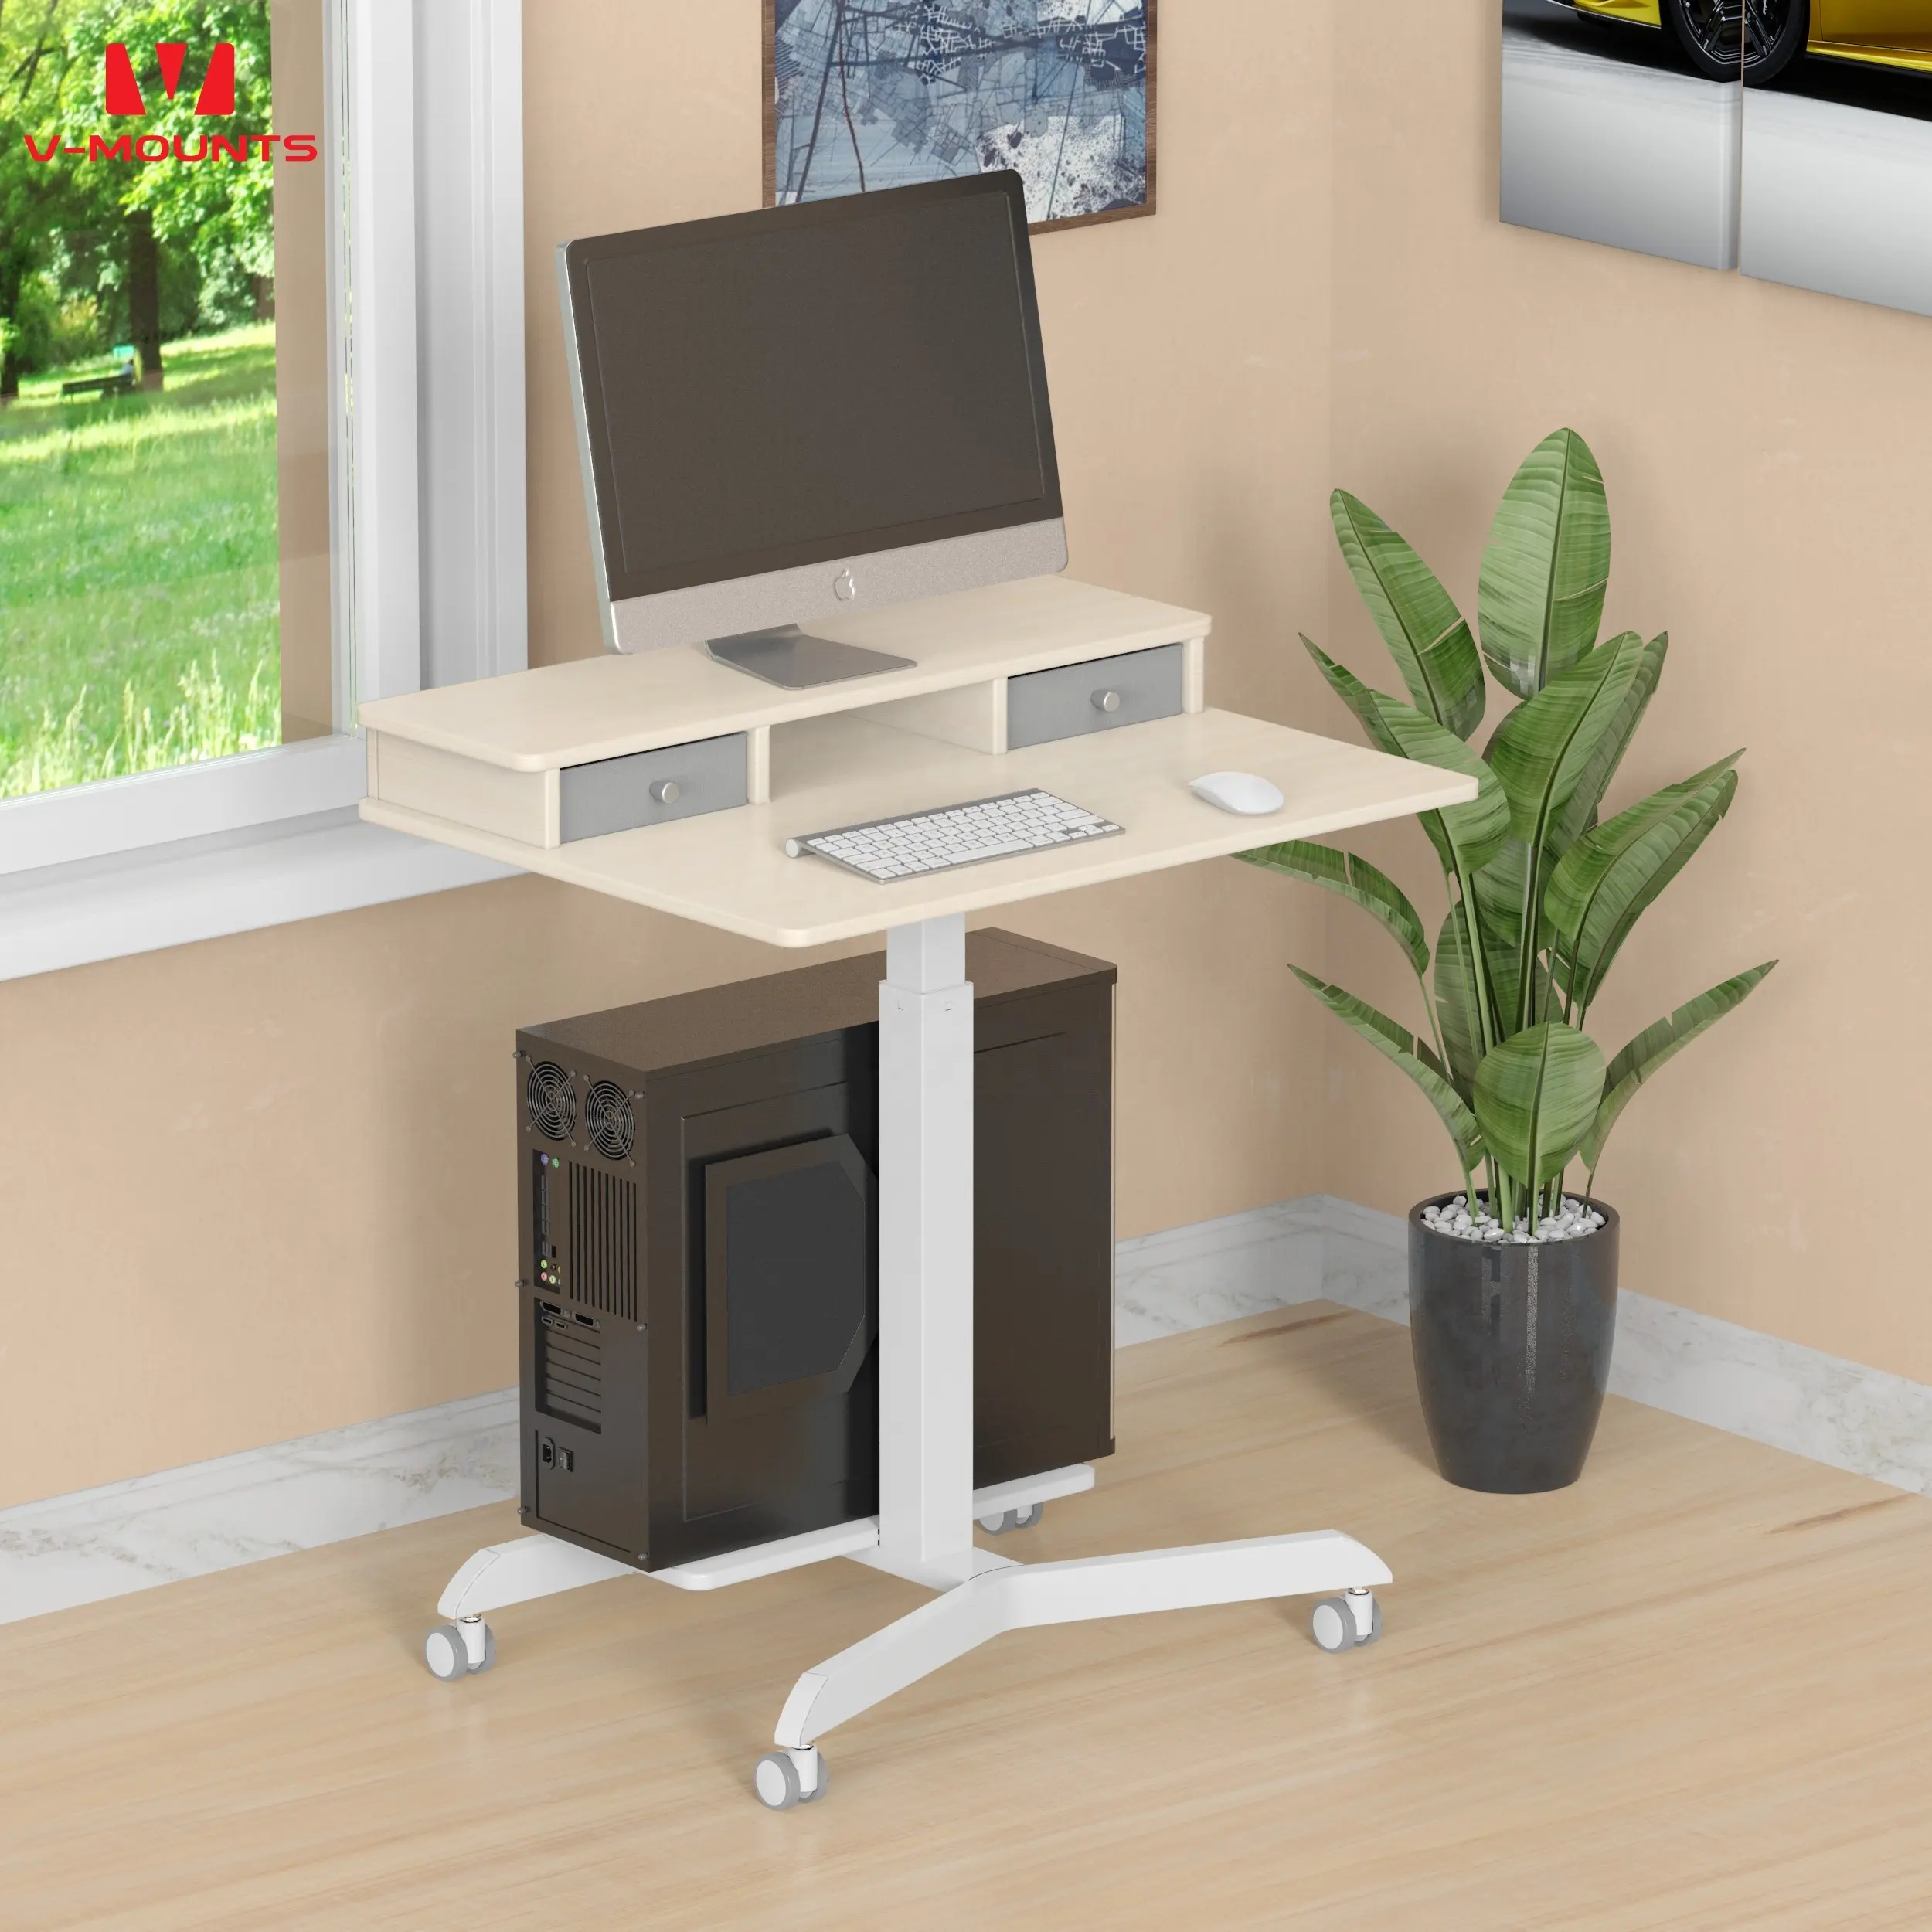 V-mounts ErgoFusion adjustable laptop stand desk notebook computer holder with chassis rack & double drawers VM-FA109